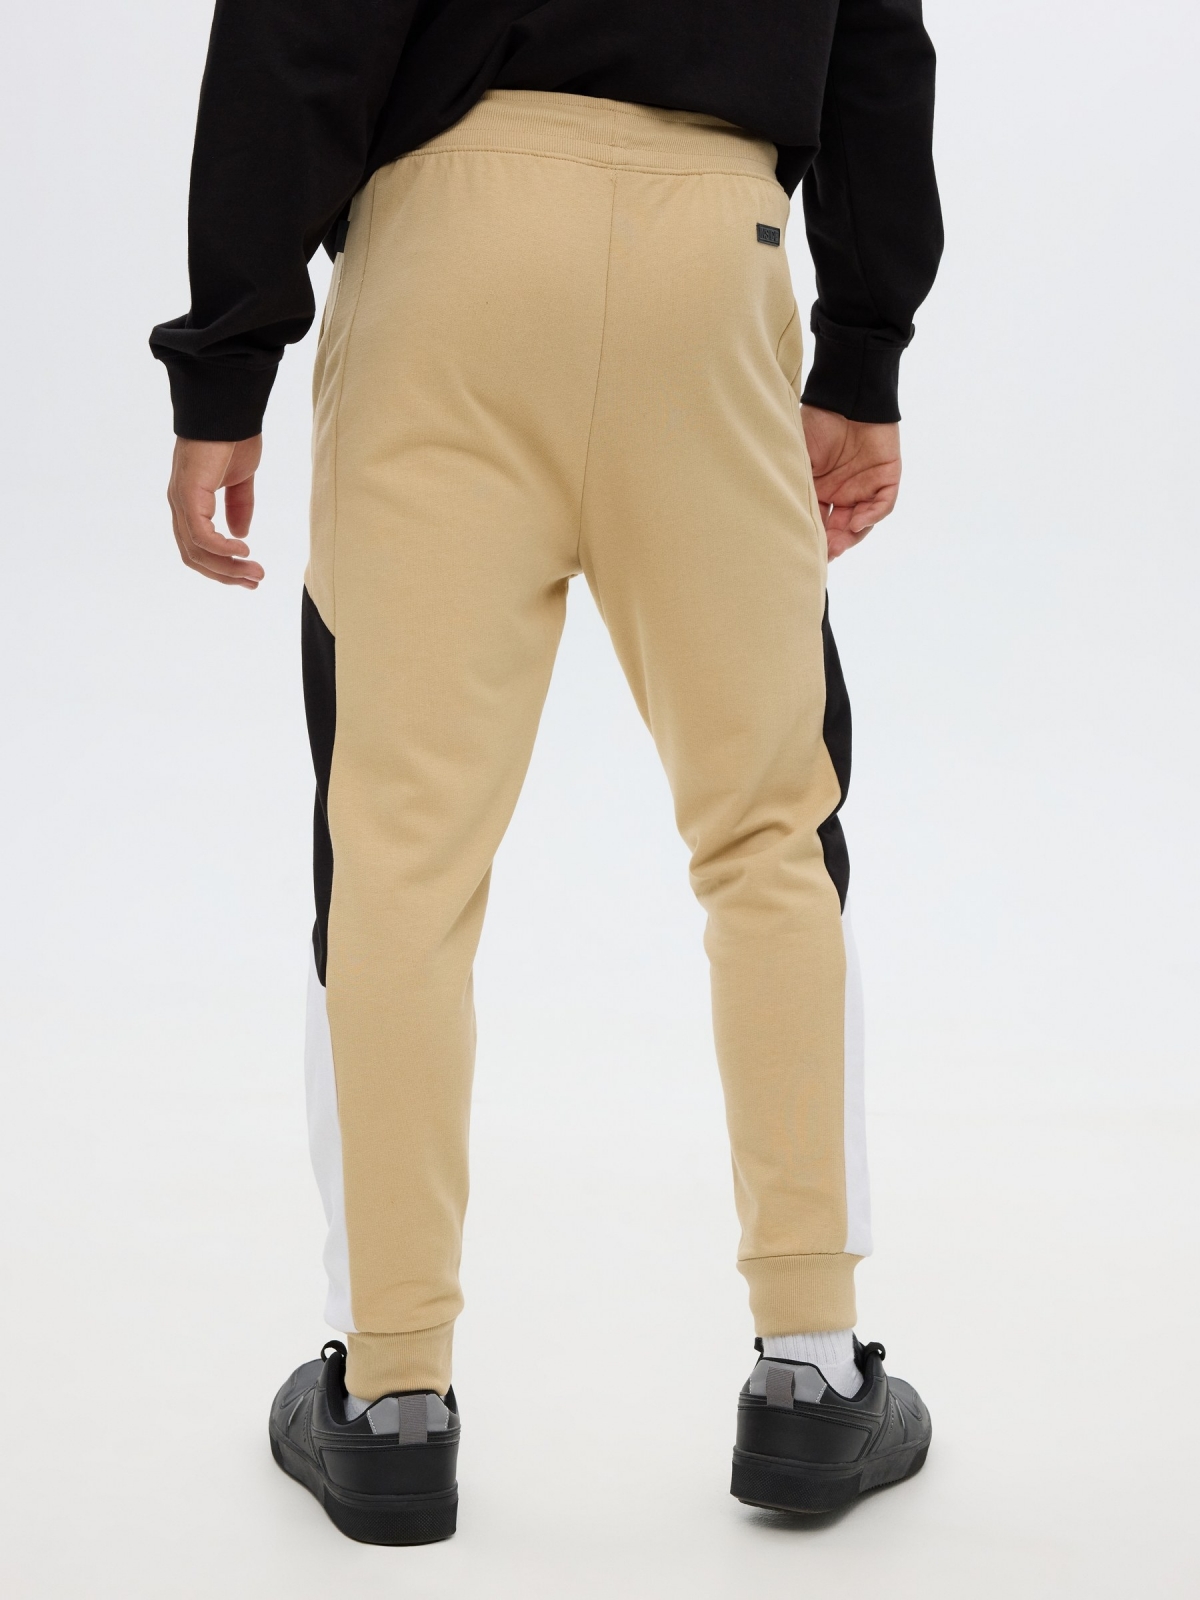 Jogger pants sand middle back view